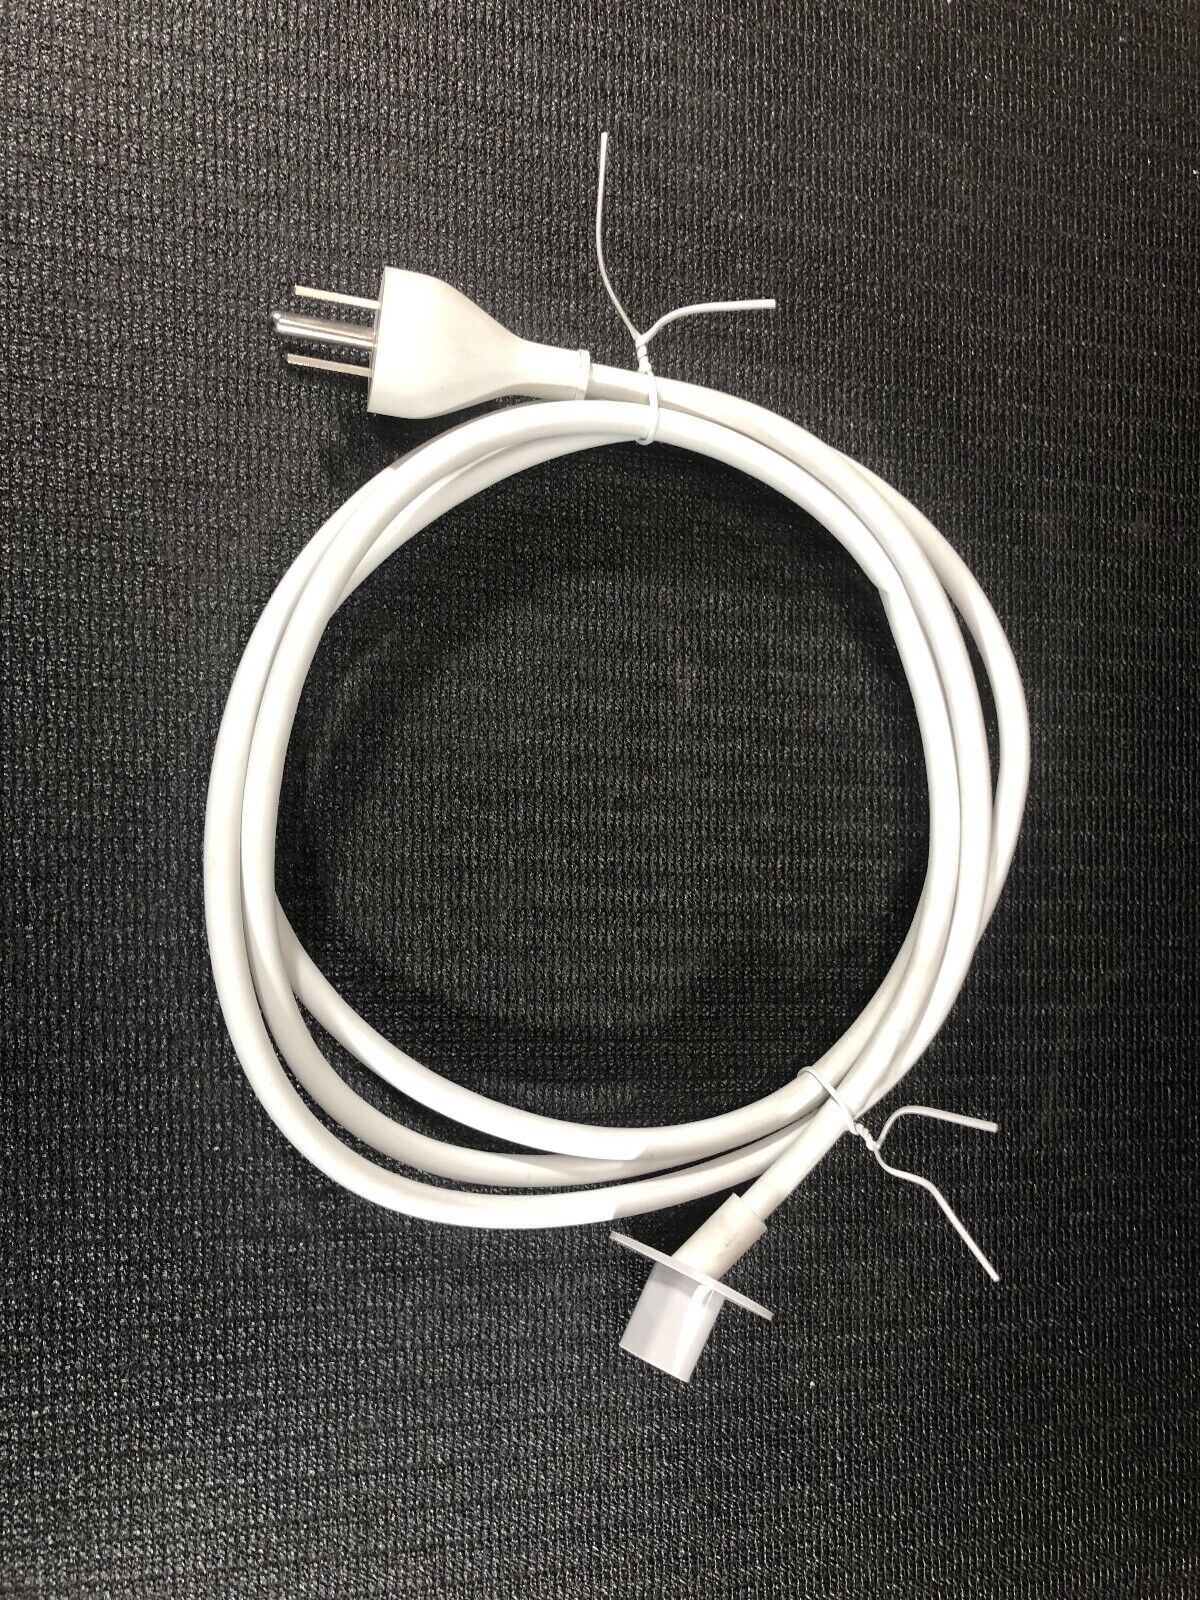 Genuine OEM 2006 - 2011 Apple iMac 6ft Power Cord Cable 622-0153 Open Box (0611)